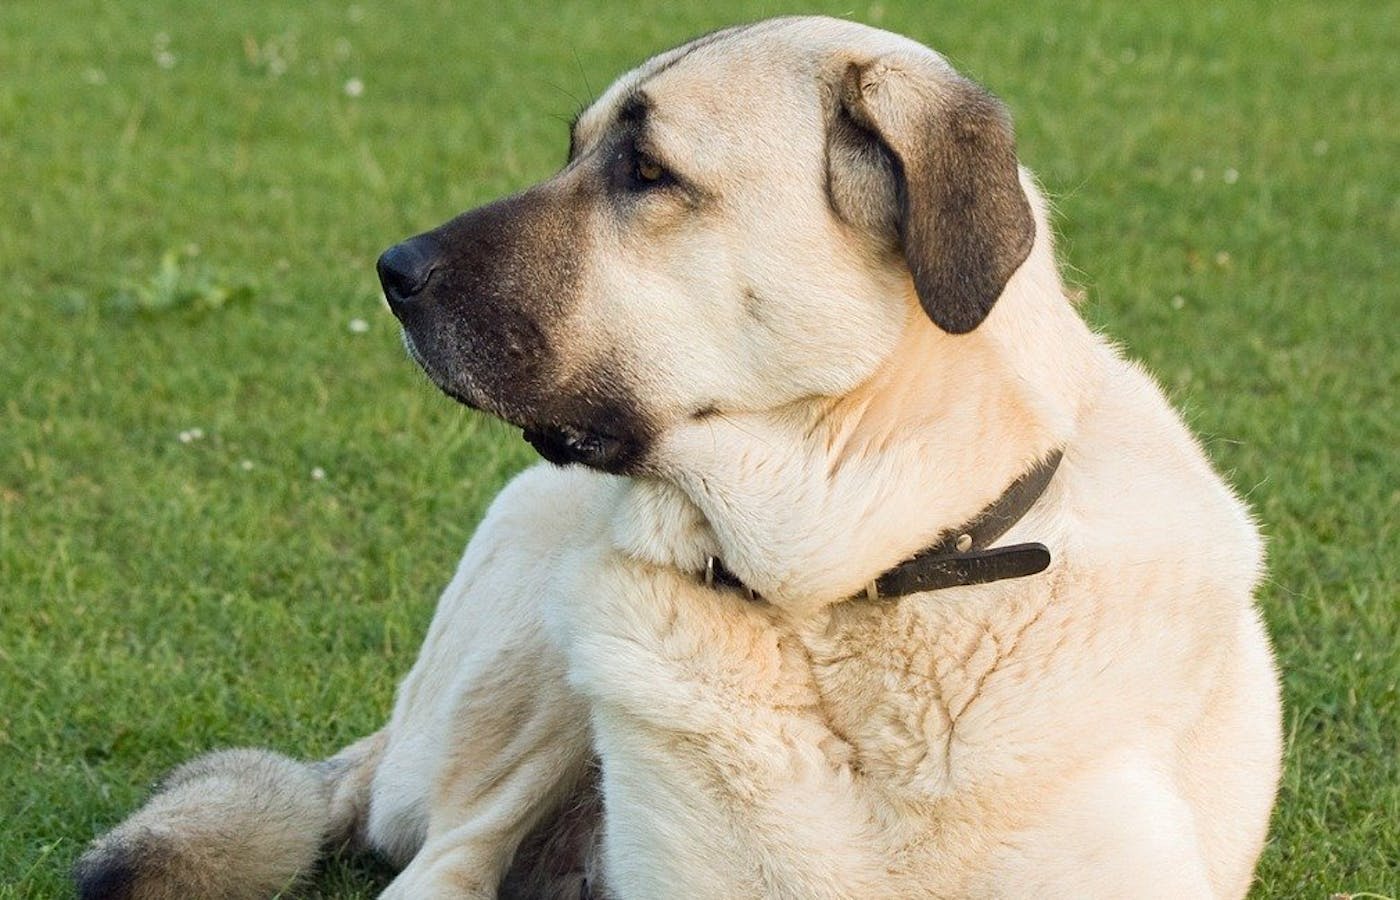 Either an Anatolian Shepherd or a Kangal  - they look very similar 